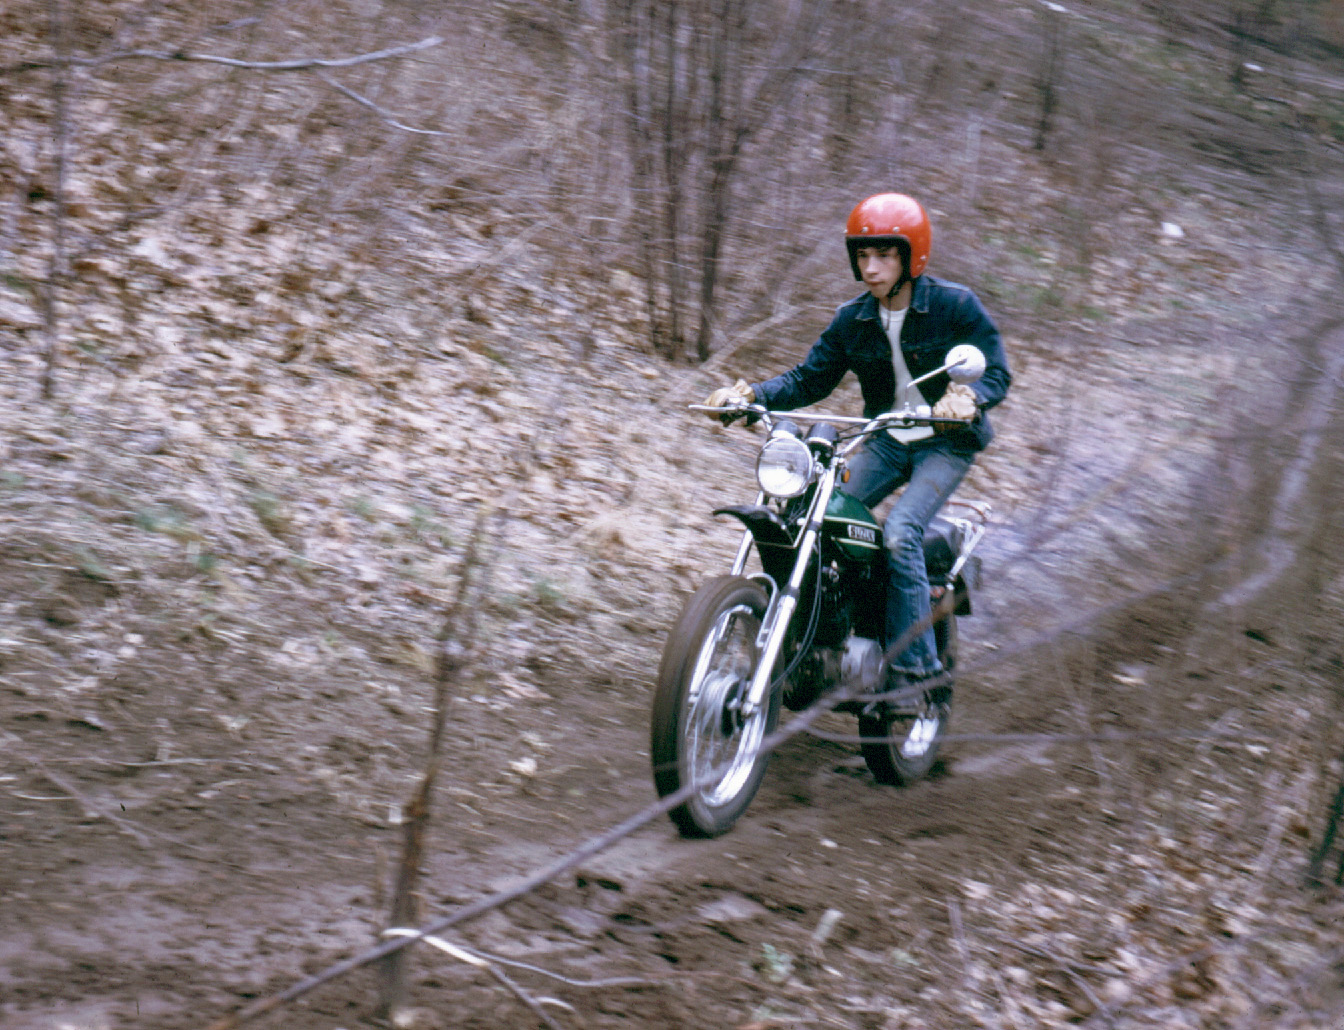 Charging a muddy hill behind Derby Downs in Akron, Ohio in 1974. It's my new 71 Suzuki 185. View full size.